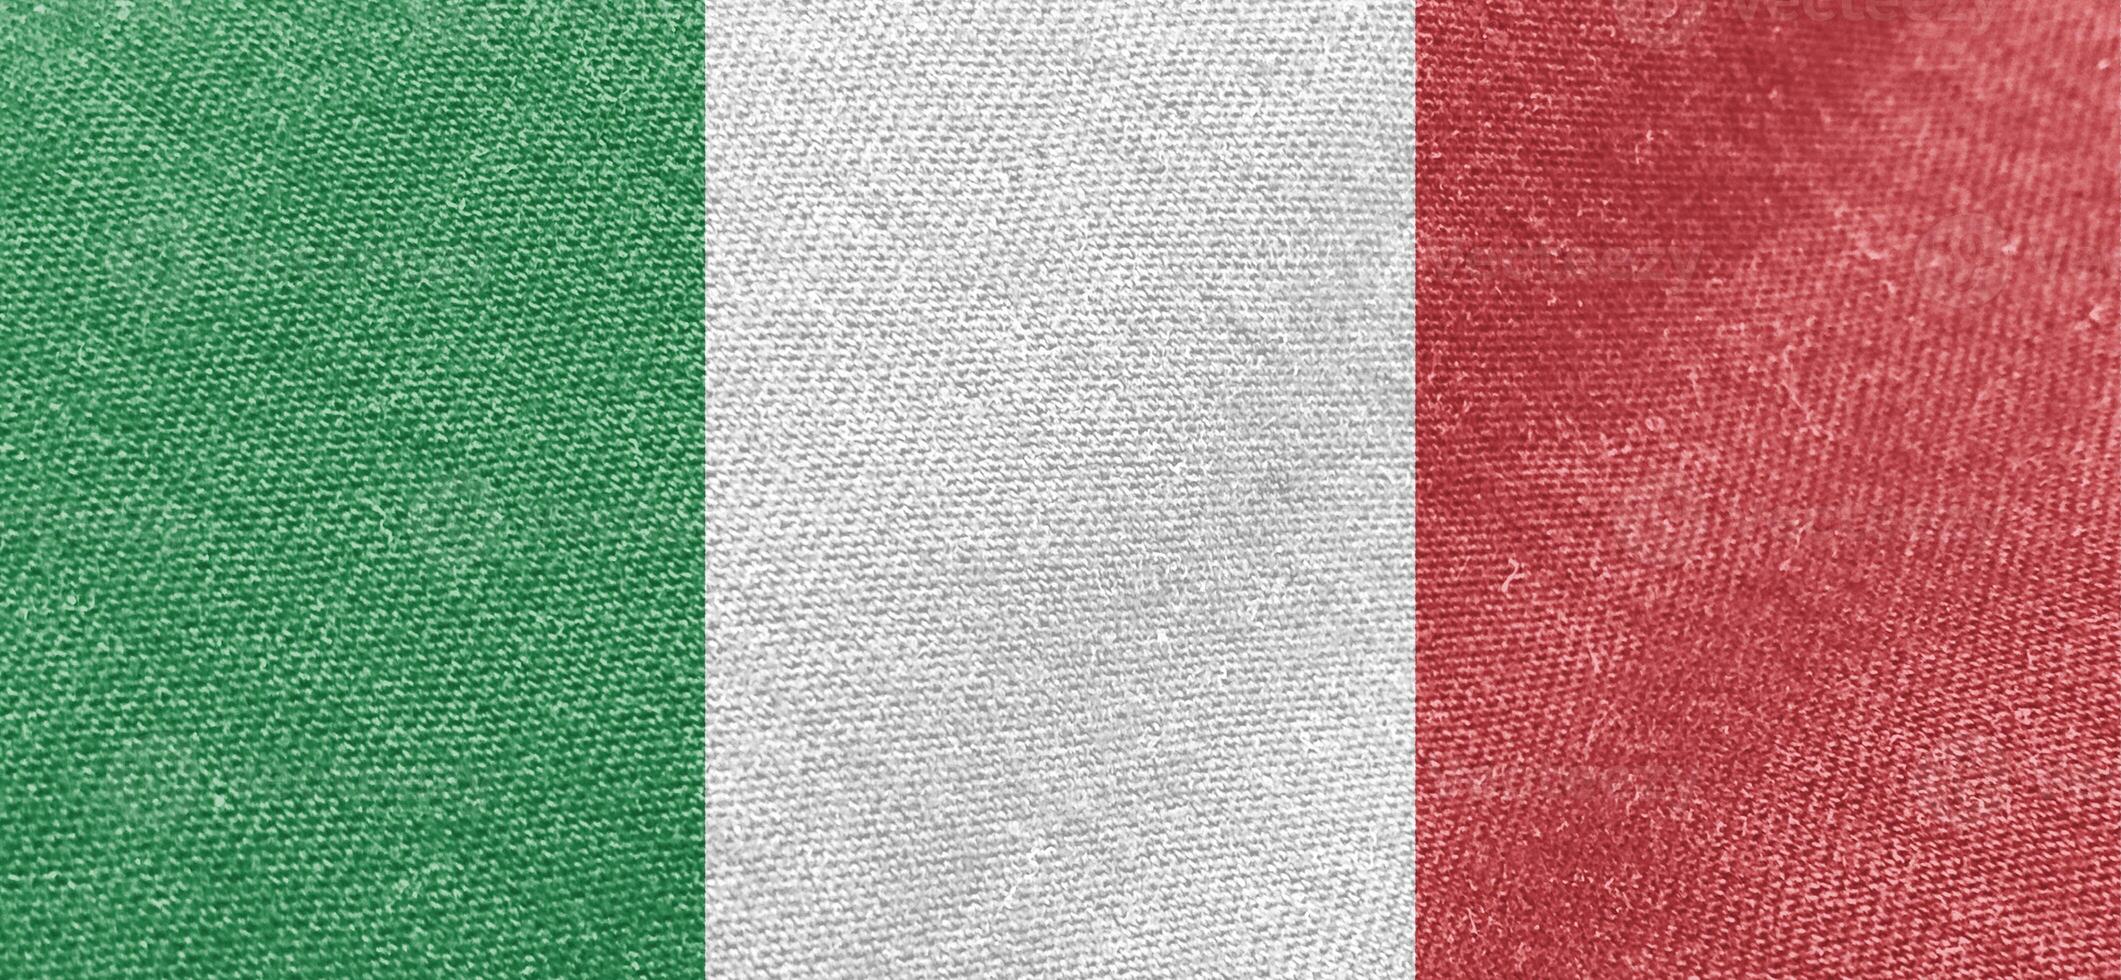 Italy flag fabric cotton material wide flag wallpaper photo